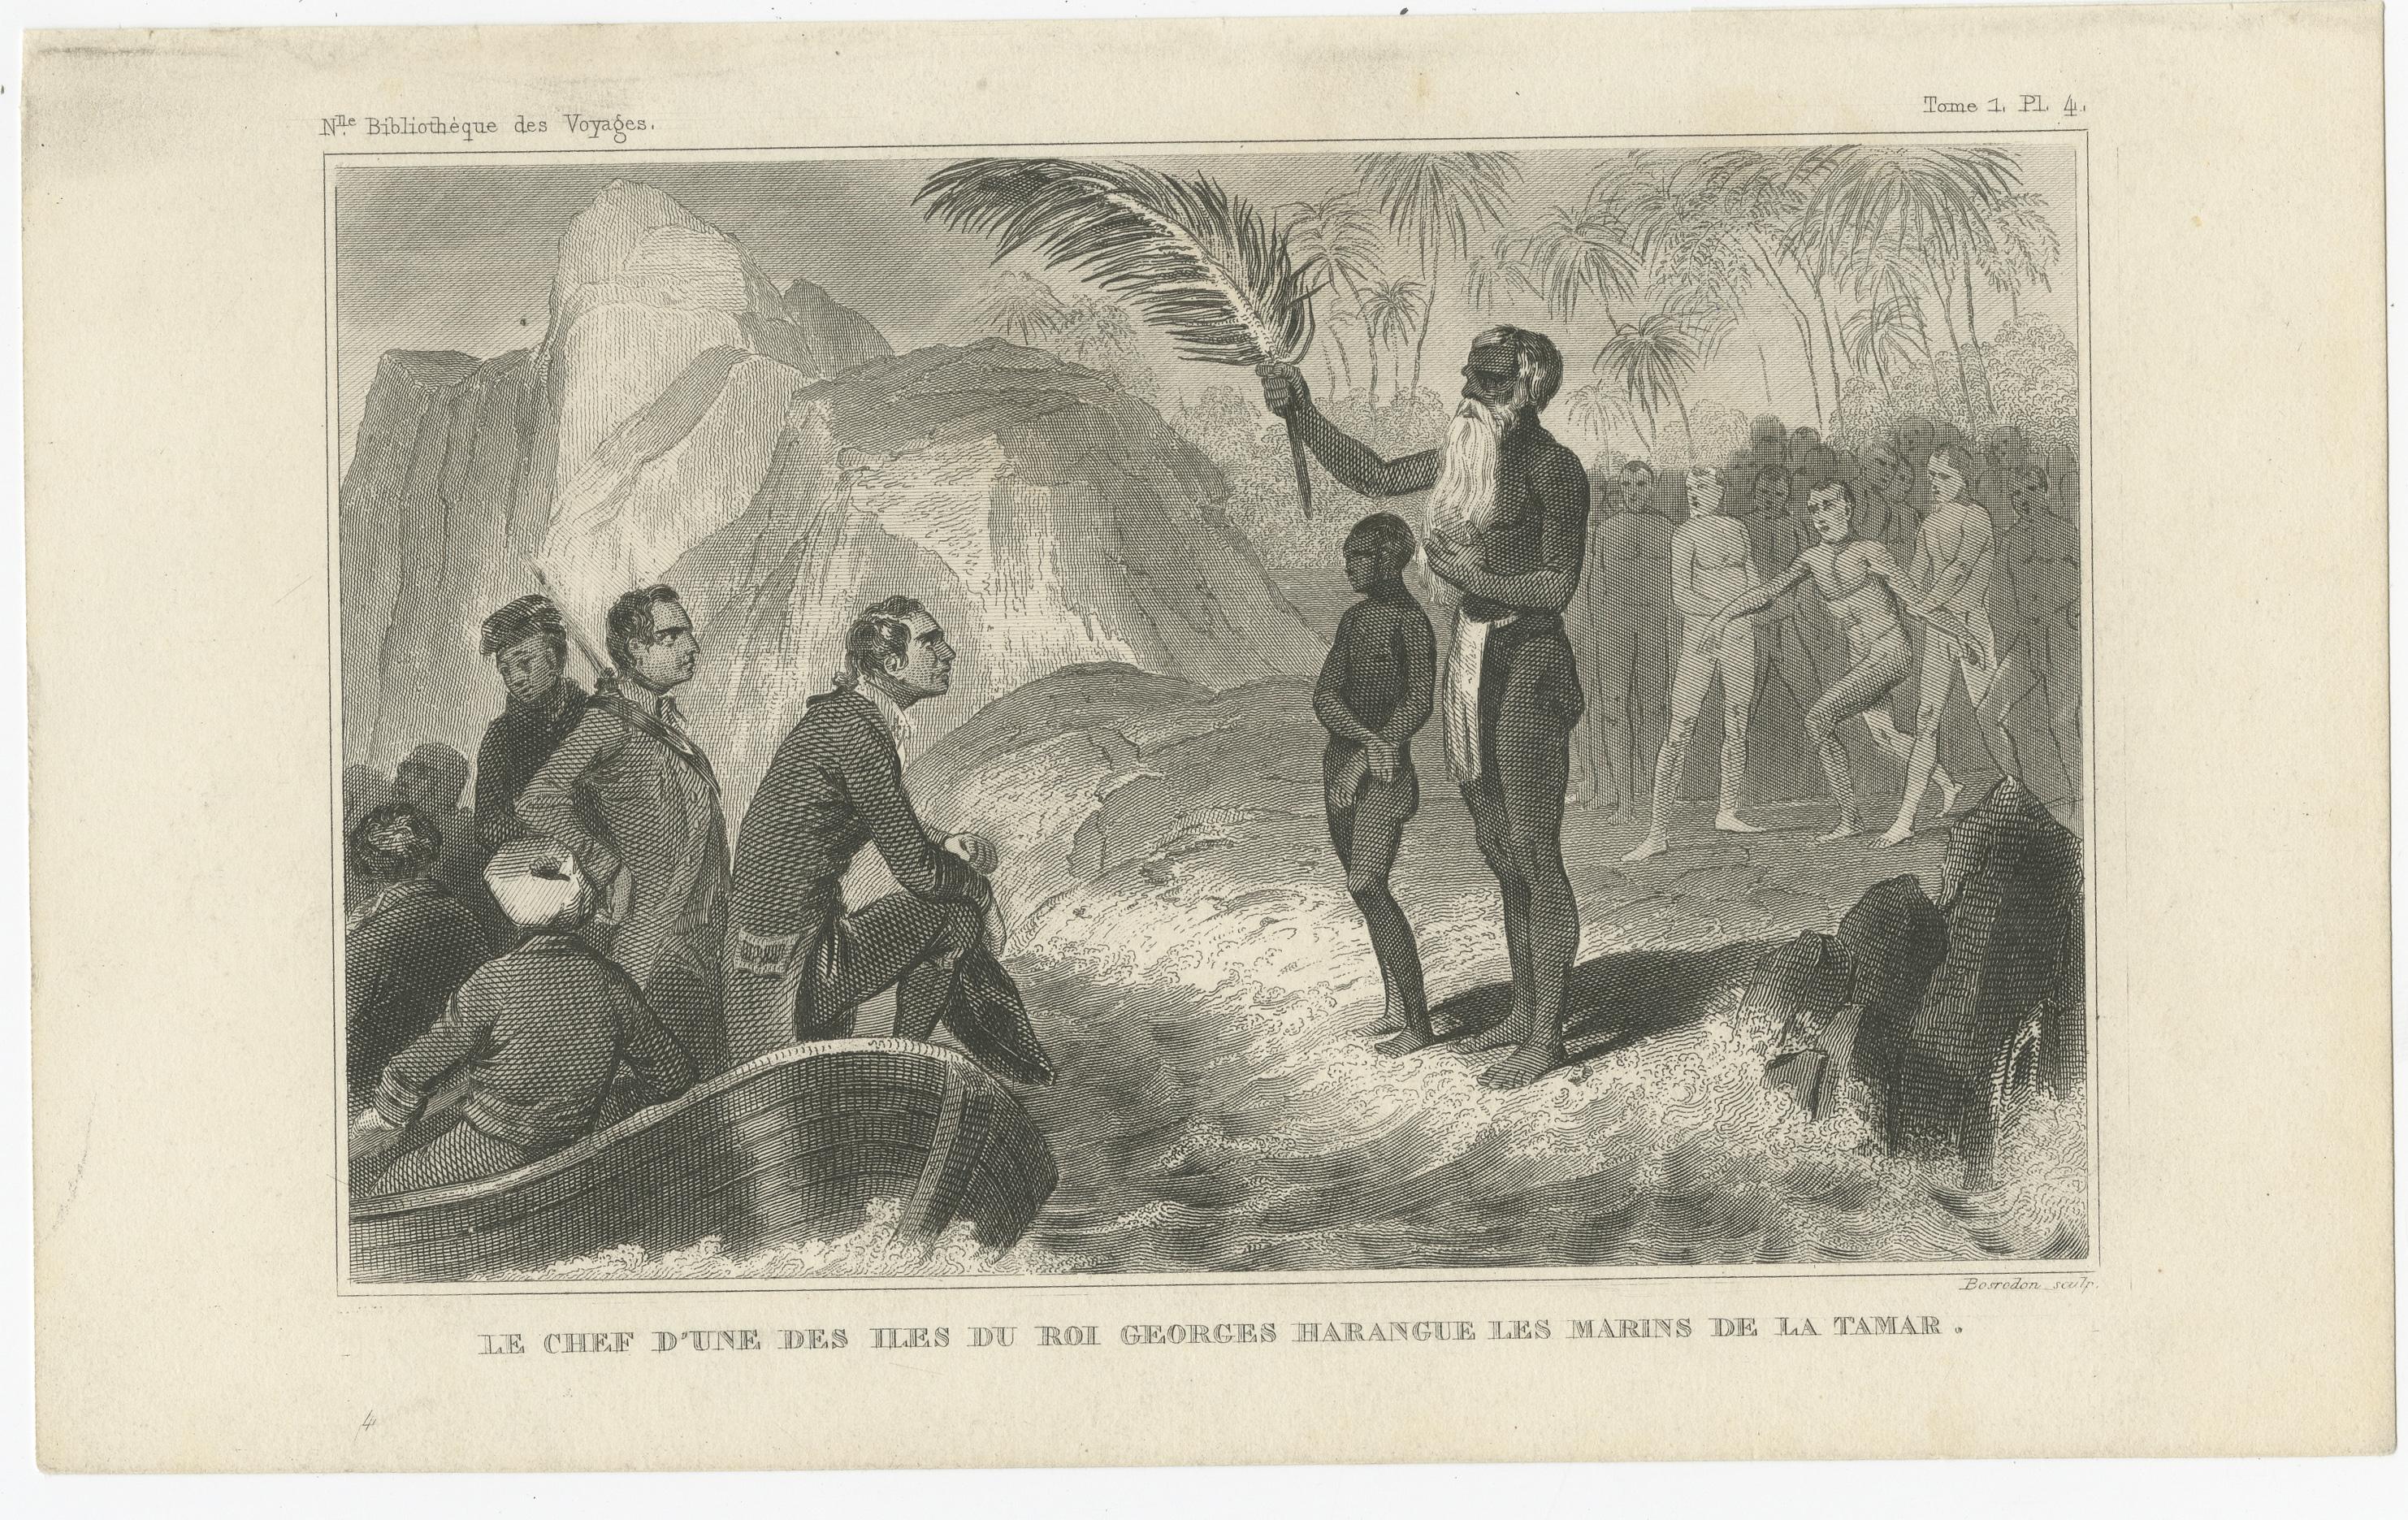 Antique print titled 'Le Chef d'une des Iles du Roi Georges Harangue les Marins de la Tamar'. This print illustrates the chief of one of the King George Islands, a subgroup of the Tuamotus Archipelago group in French Polynesia. Originates from